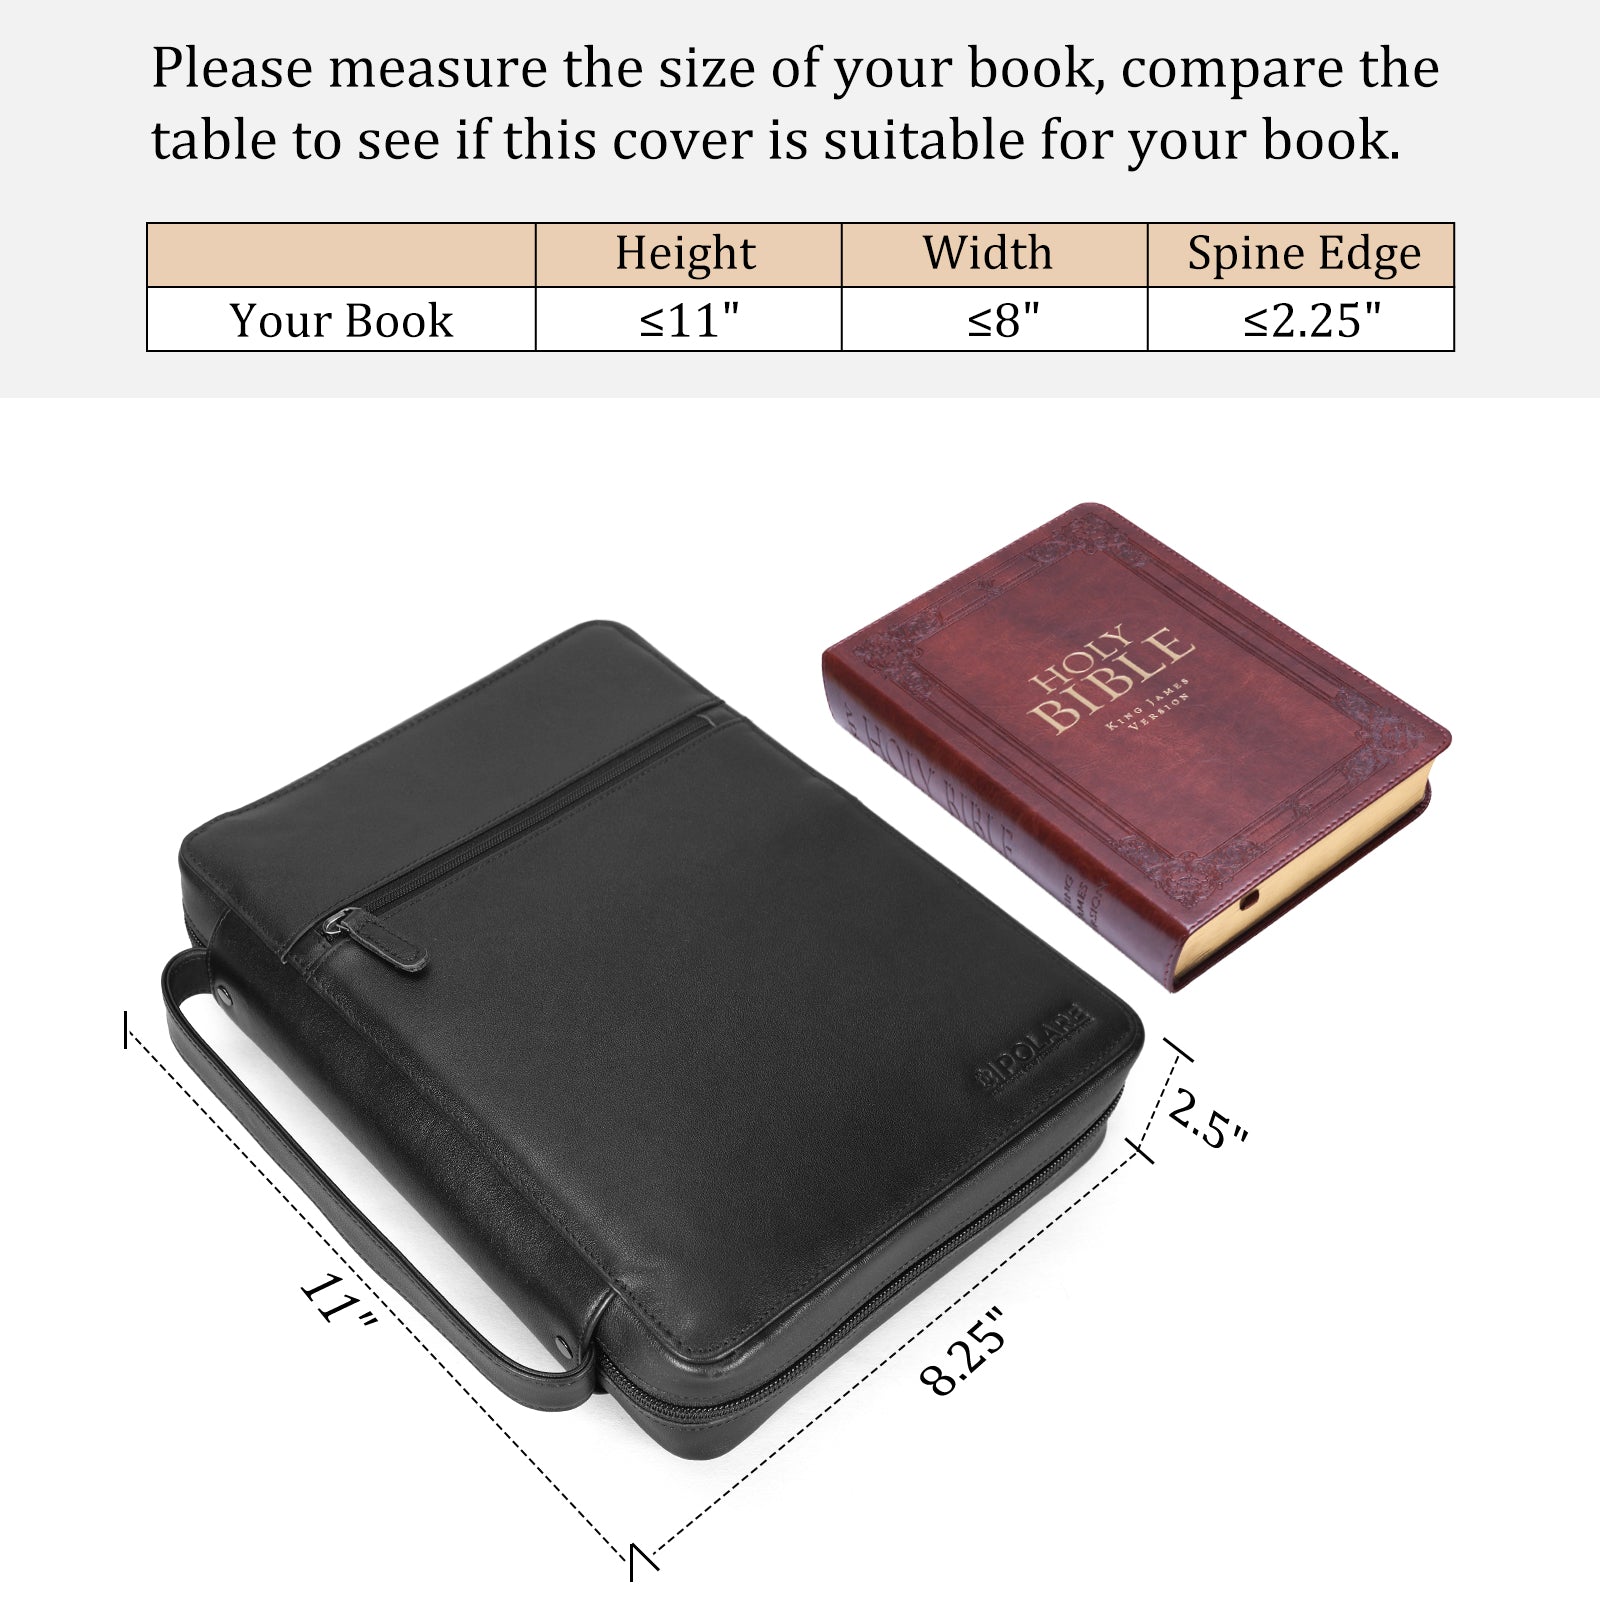 Polare Full Grain Leather Bible Cover Church Bag Bible Protective Book Holder Carrying Case Folder Organizer Portfolio with YKK Zippers, Dark Brown(Strong & Courageous)